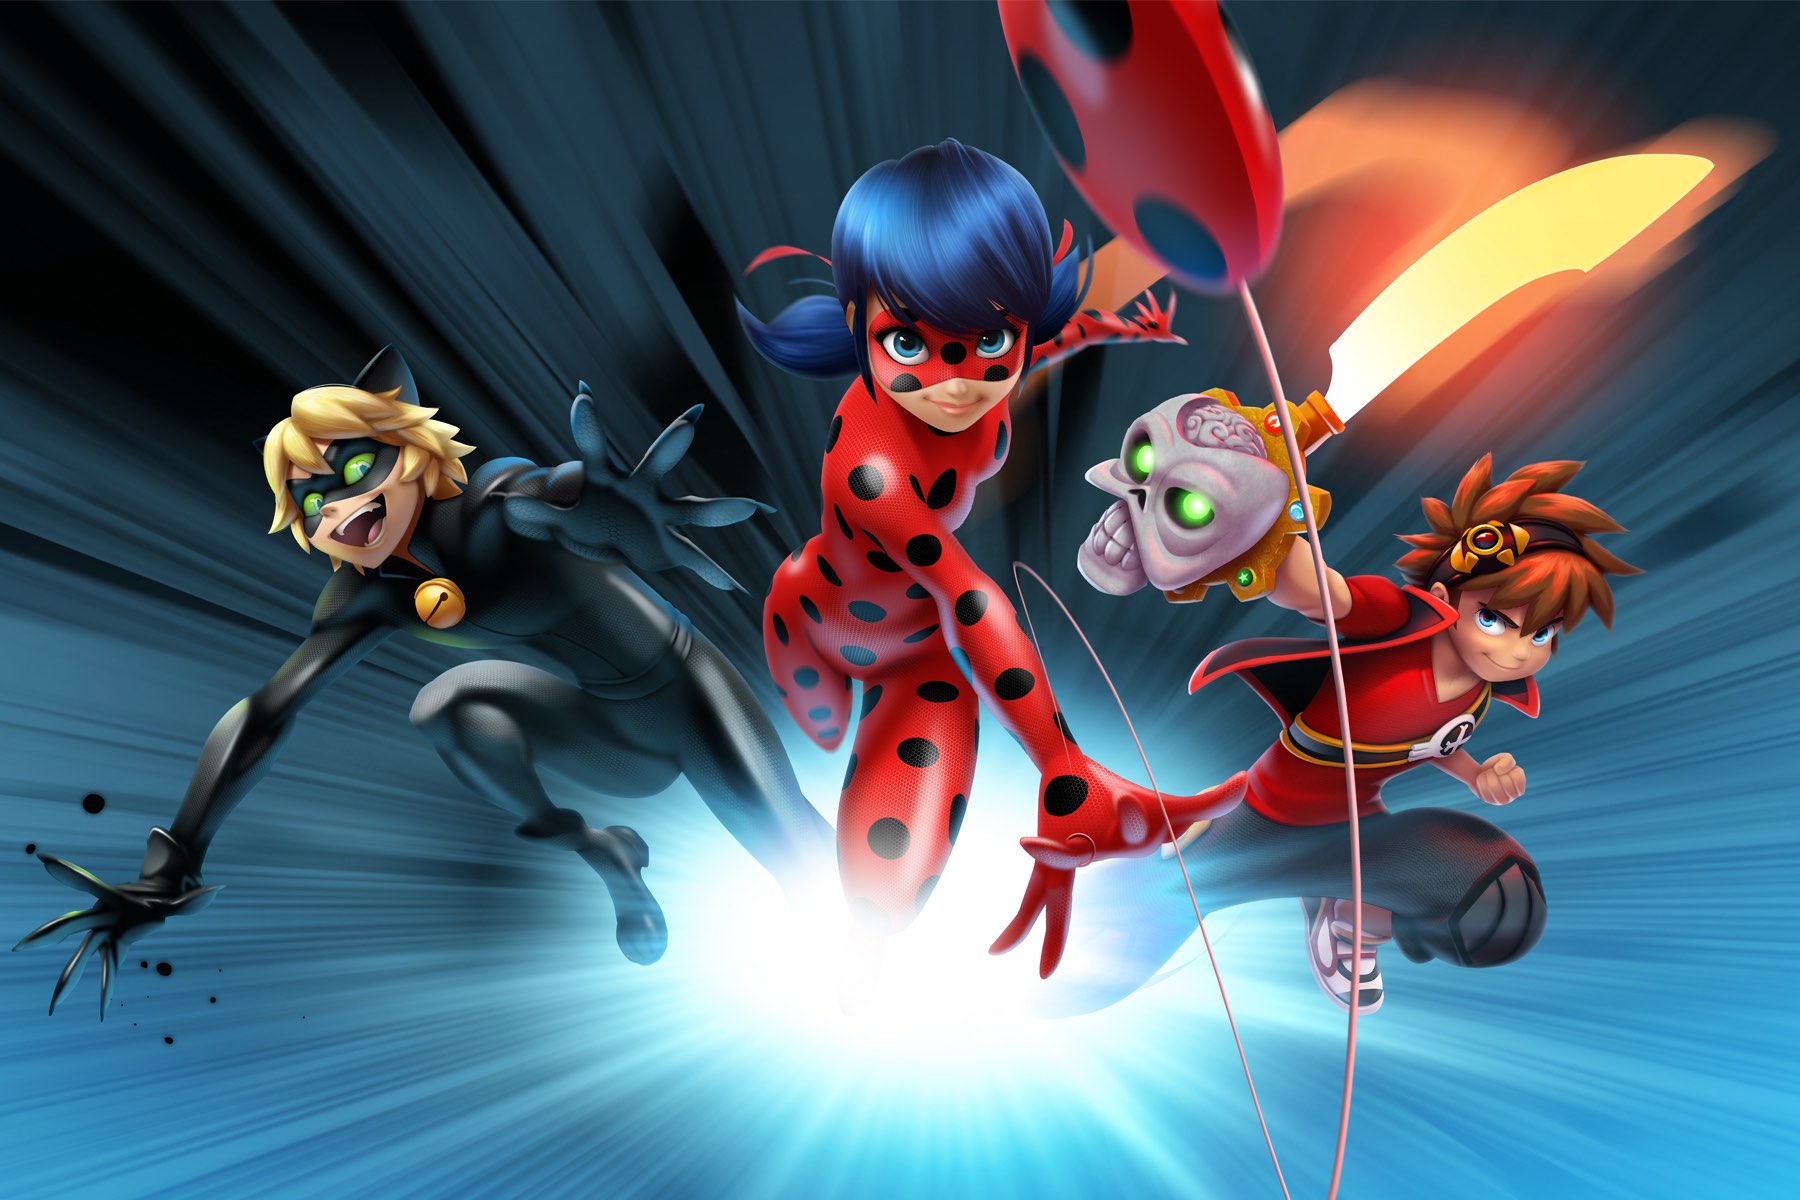 https://static.wikia.nocookie.net/lady-bug/images/2/21/ZAG_Heroez_-_%22Miraculous%22_and_%22Zak_Storm%22_Global_Growth_promotional_artwork.jpg/revision/latest?cb=20171125031228